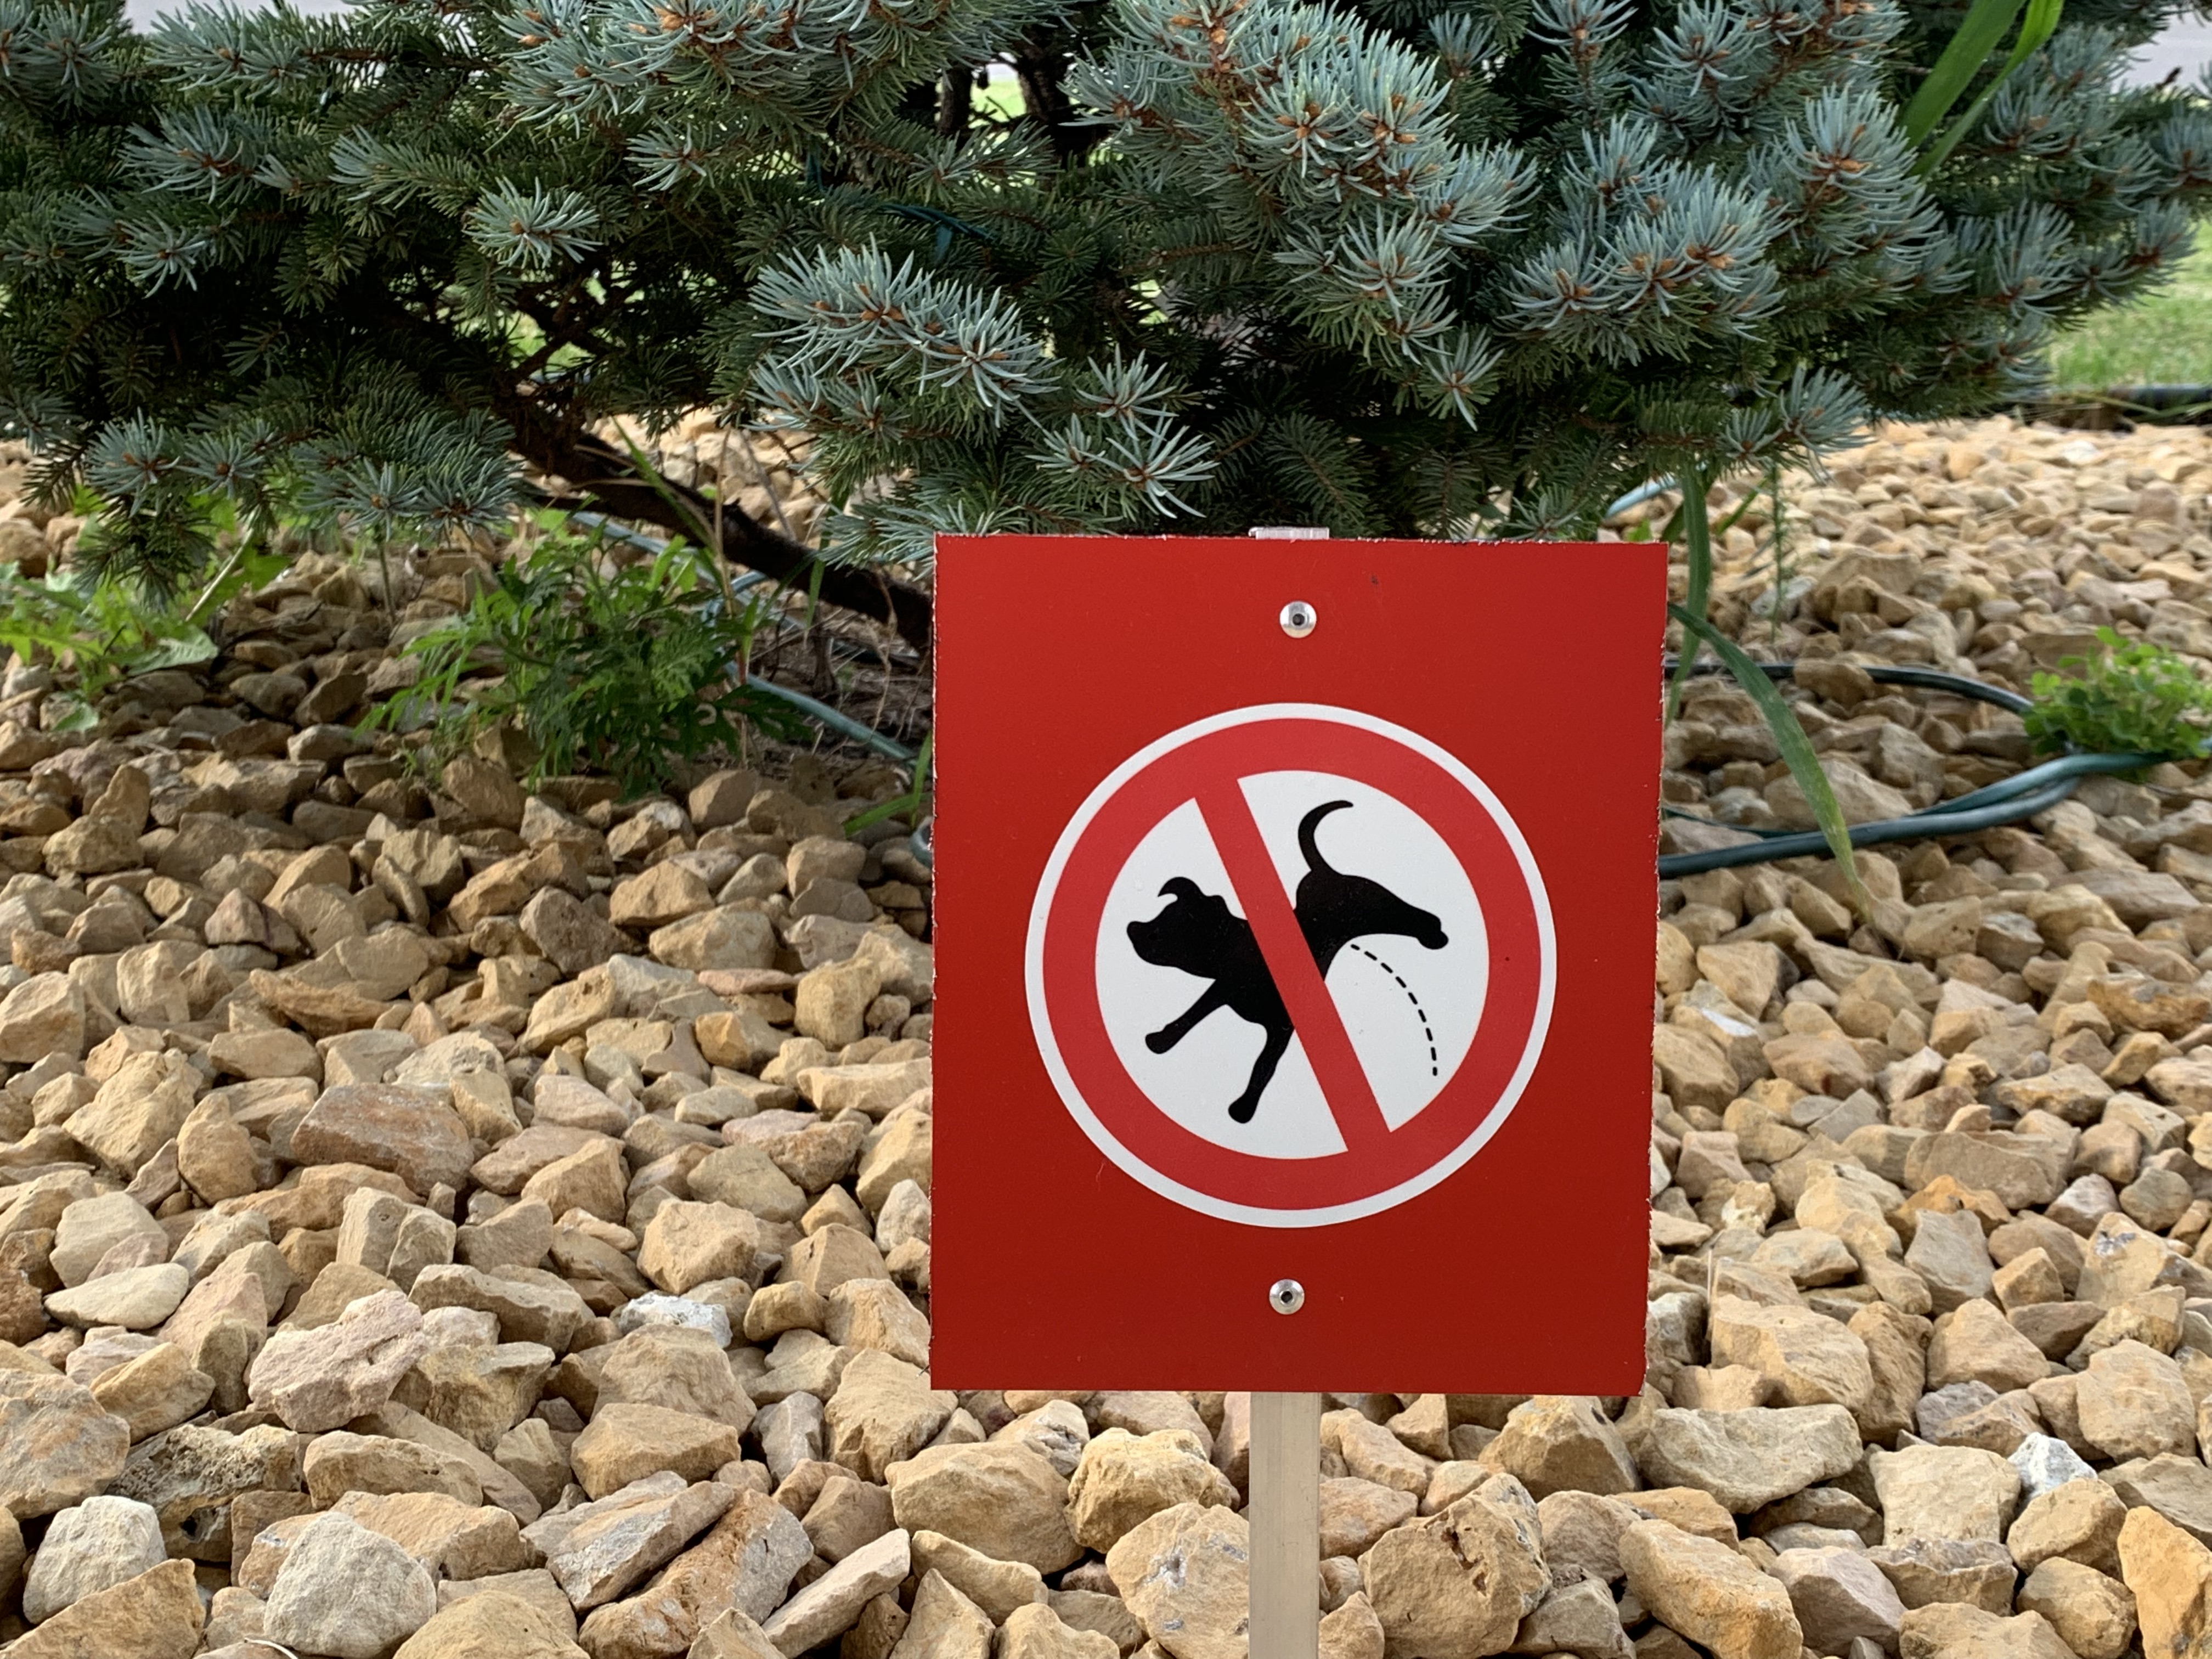 A small red sign stuck in the ground by some landscaping, bearing a picture of a dog peeing with the red “no” symbol over it.